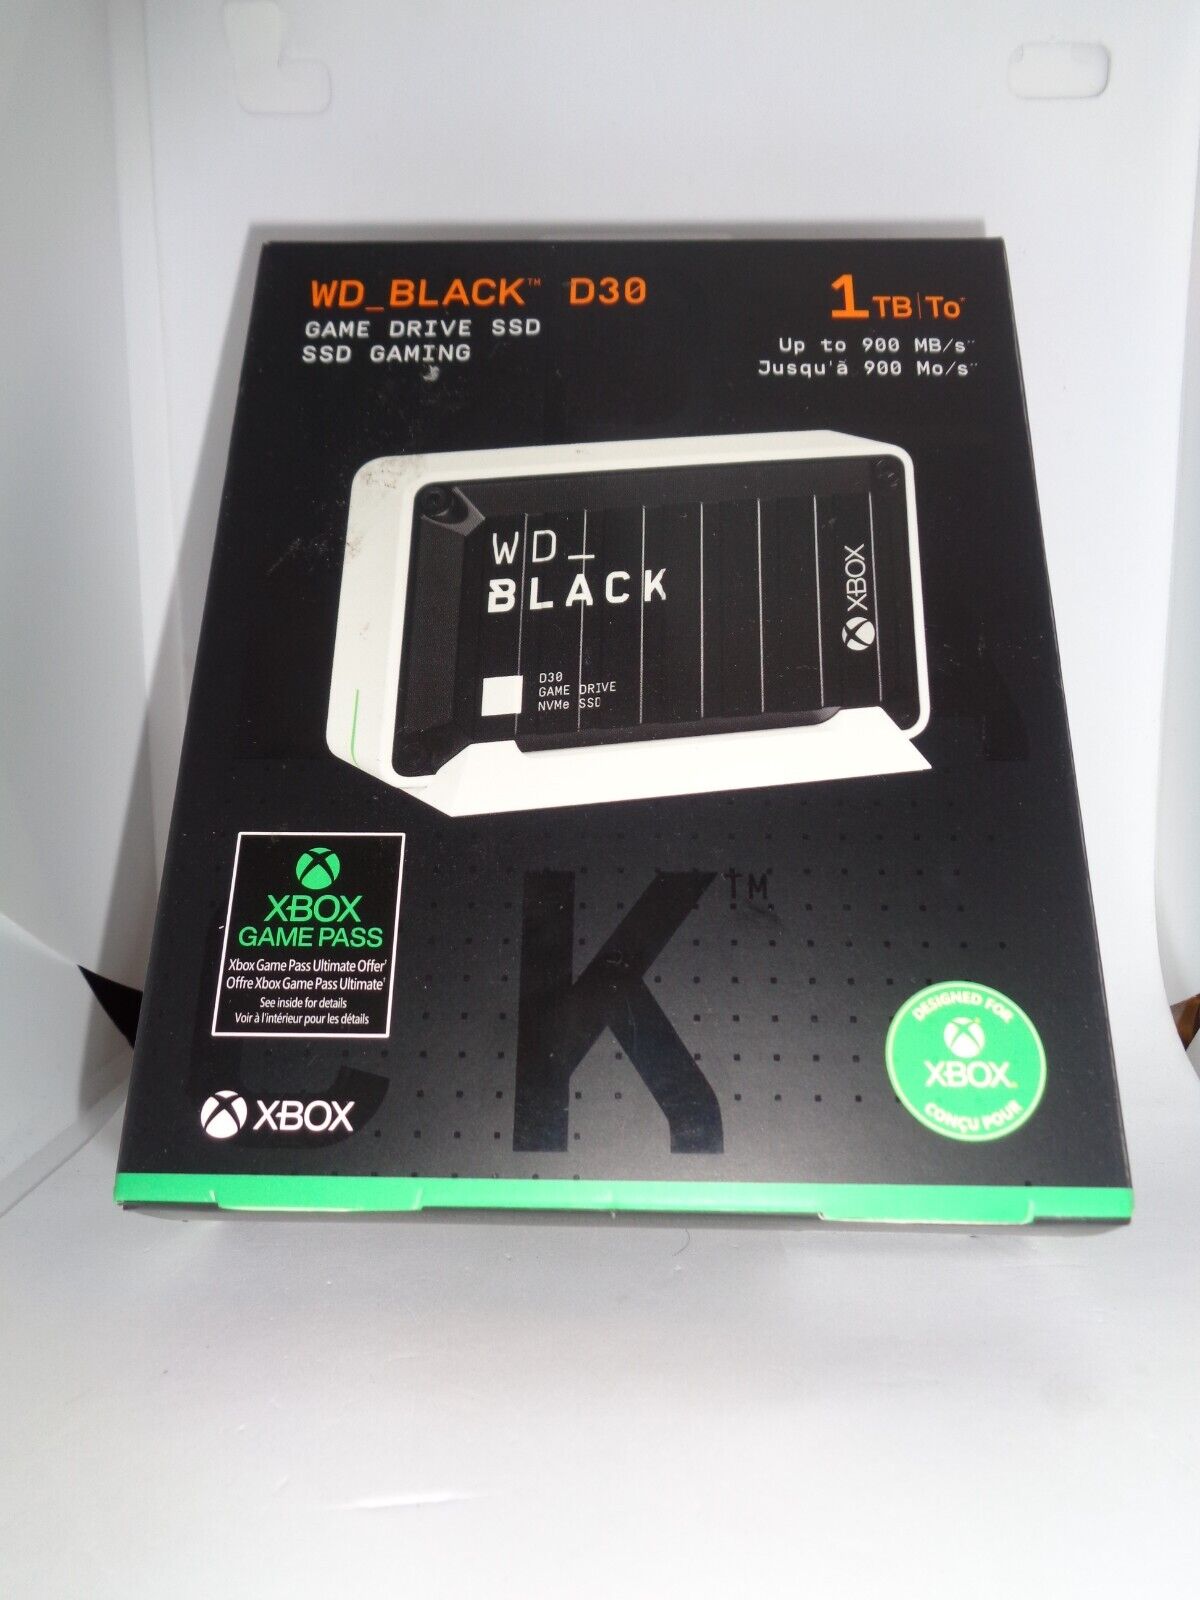 WD Black D30 1 TB Game Drive SSD For Xbox